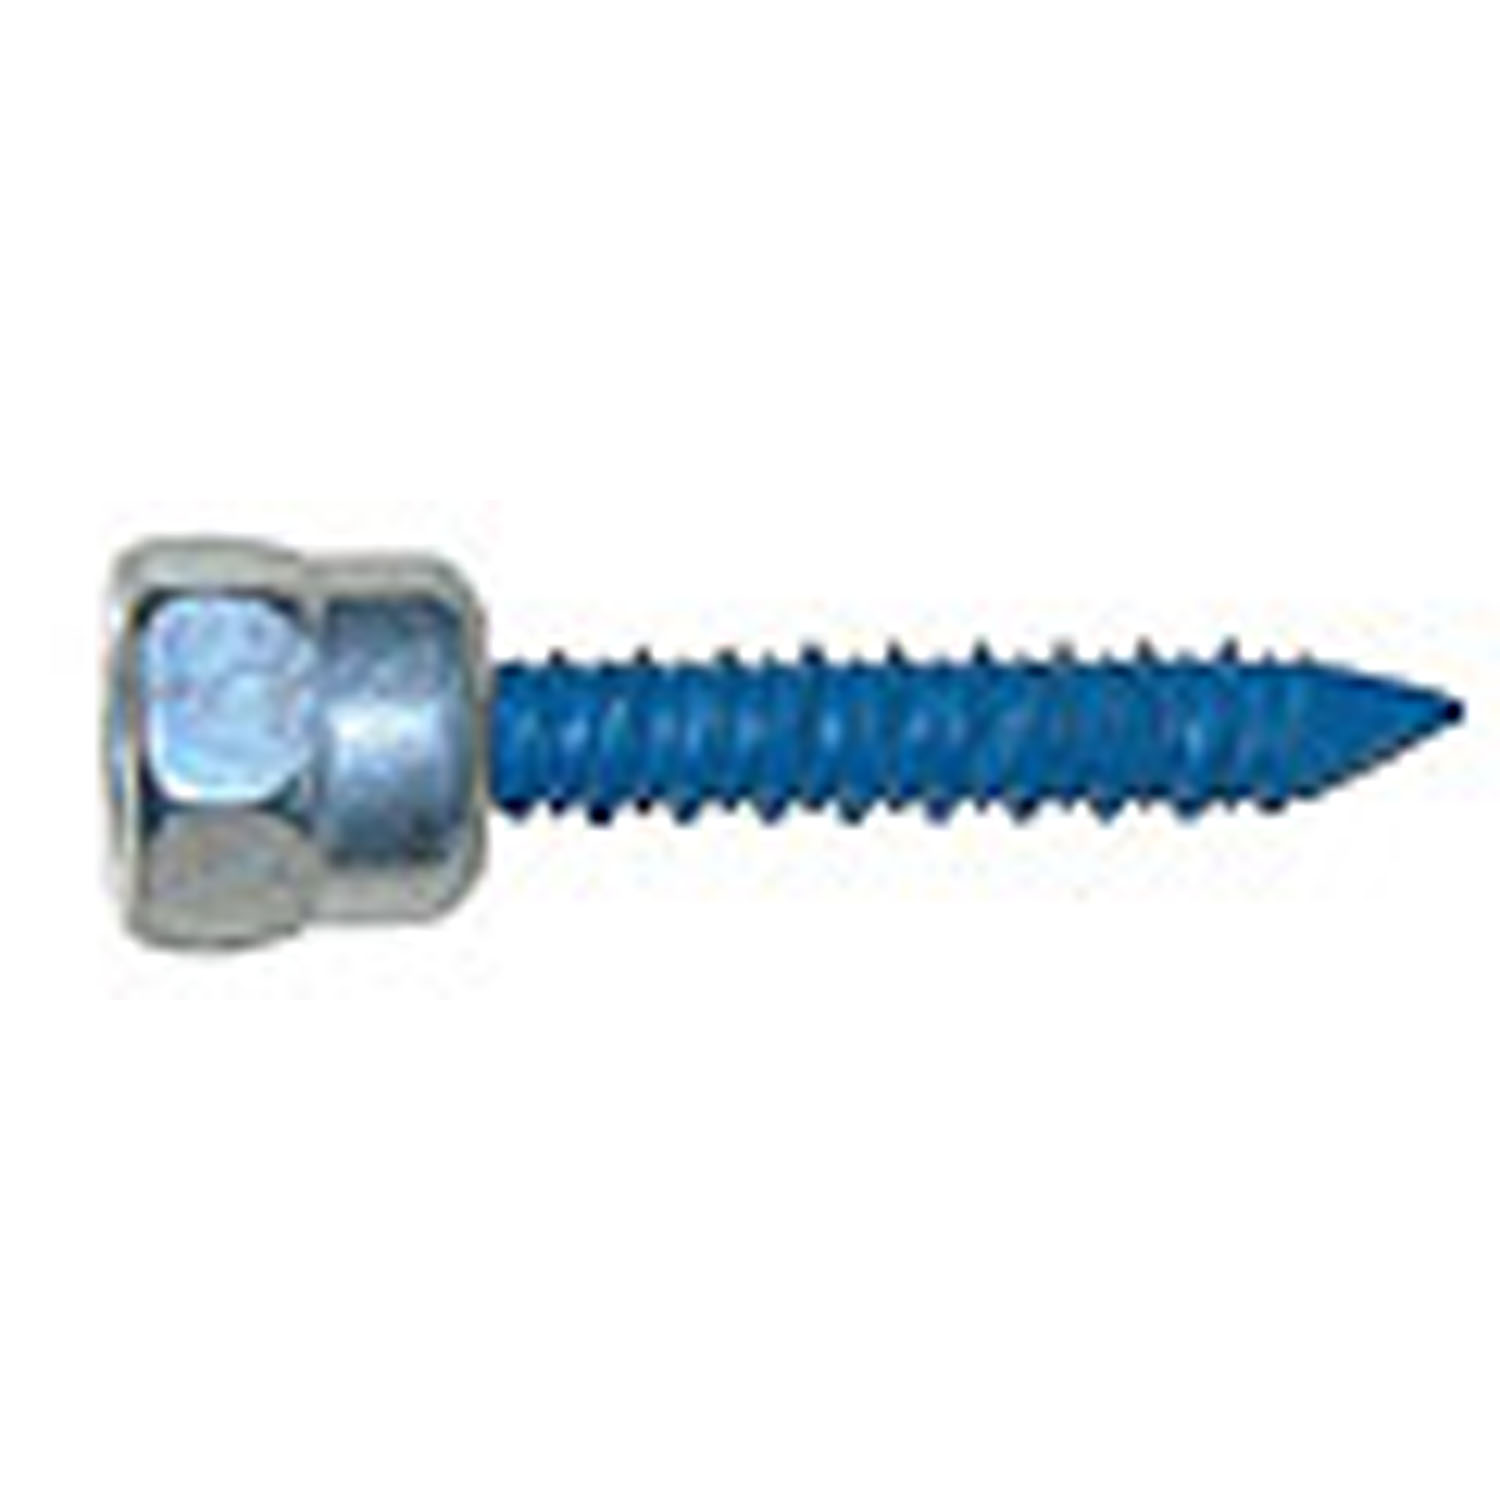 5/16 X 1-3/4 IN. CST 20 SAMMY 3/8 IN. VERTICAL THREADED ROD ANCHOR FOR CONCRETE